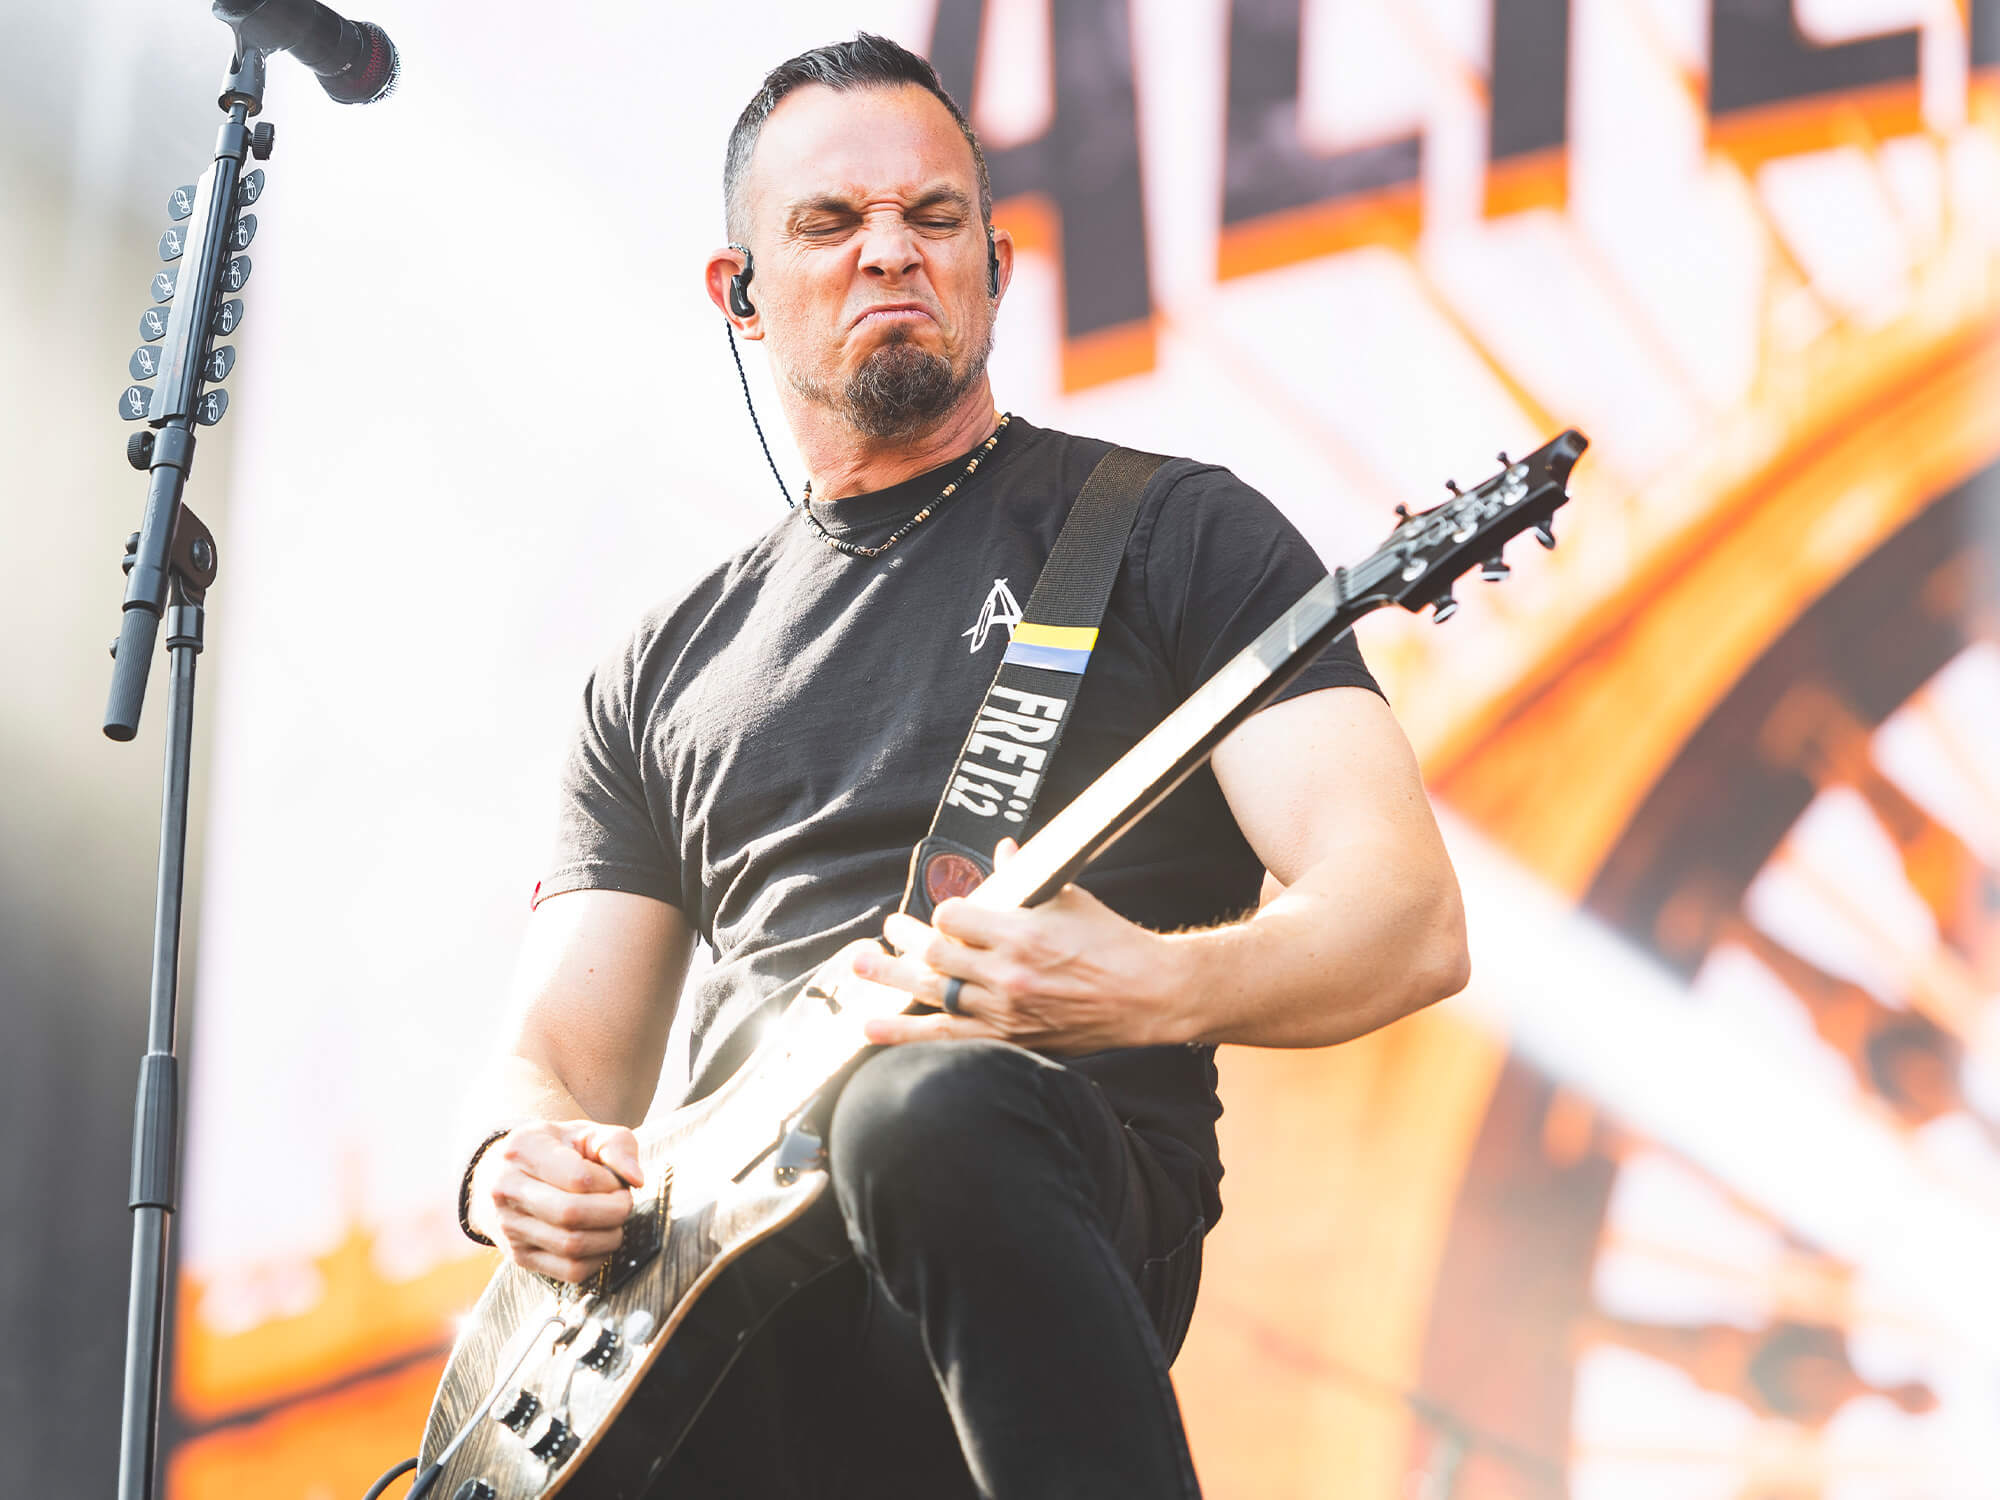 Mark Tremonti playing guitar on stage with a snarling expression on his face.